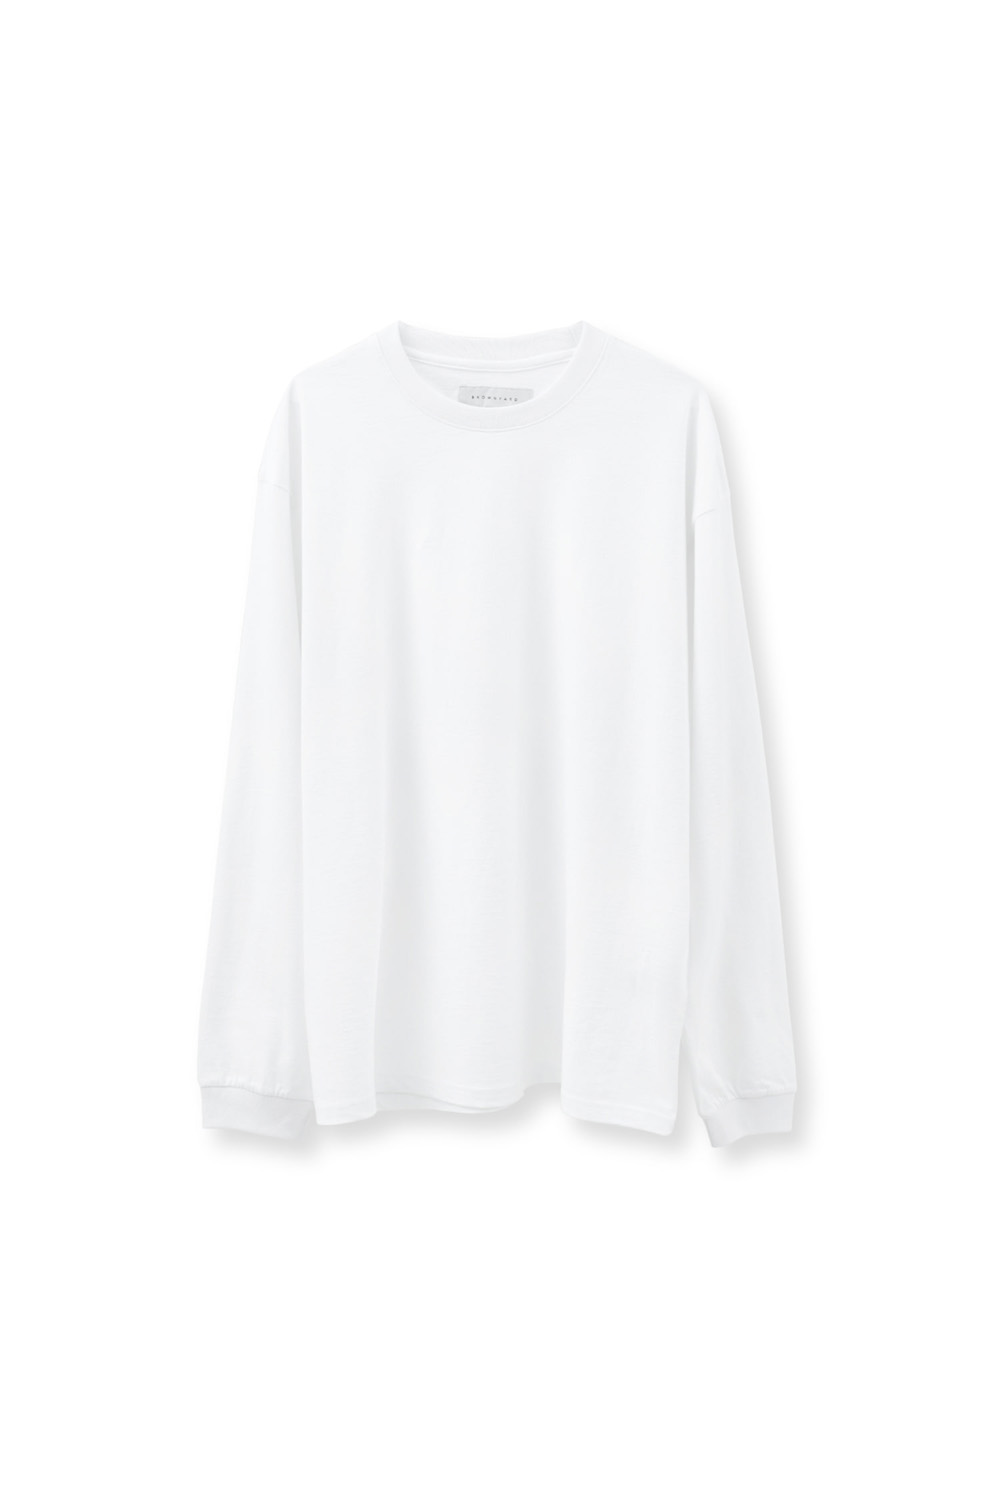 One Day Long Sleeve_White